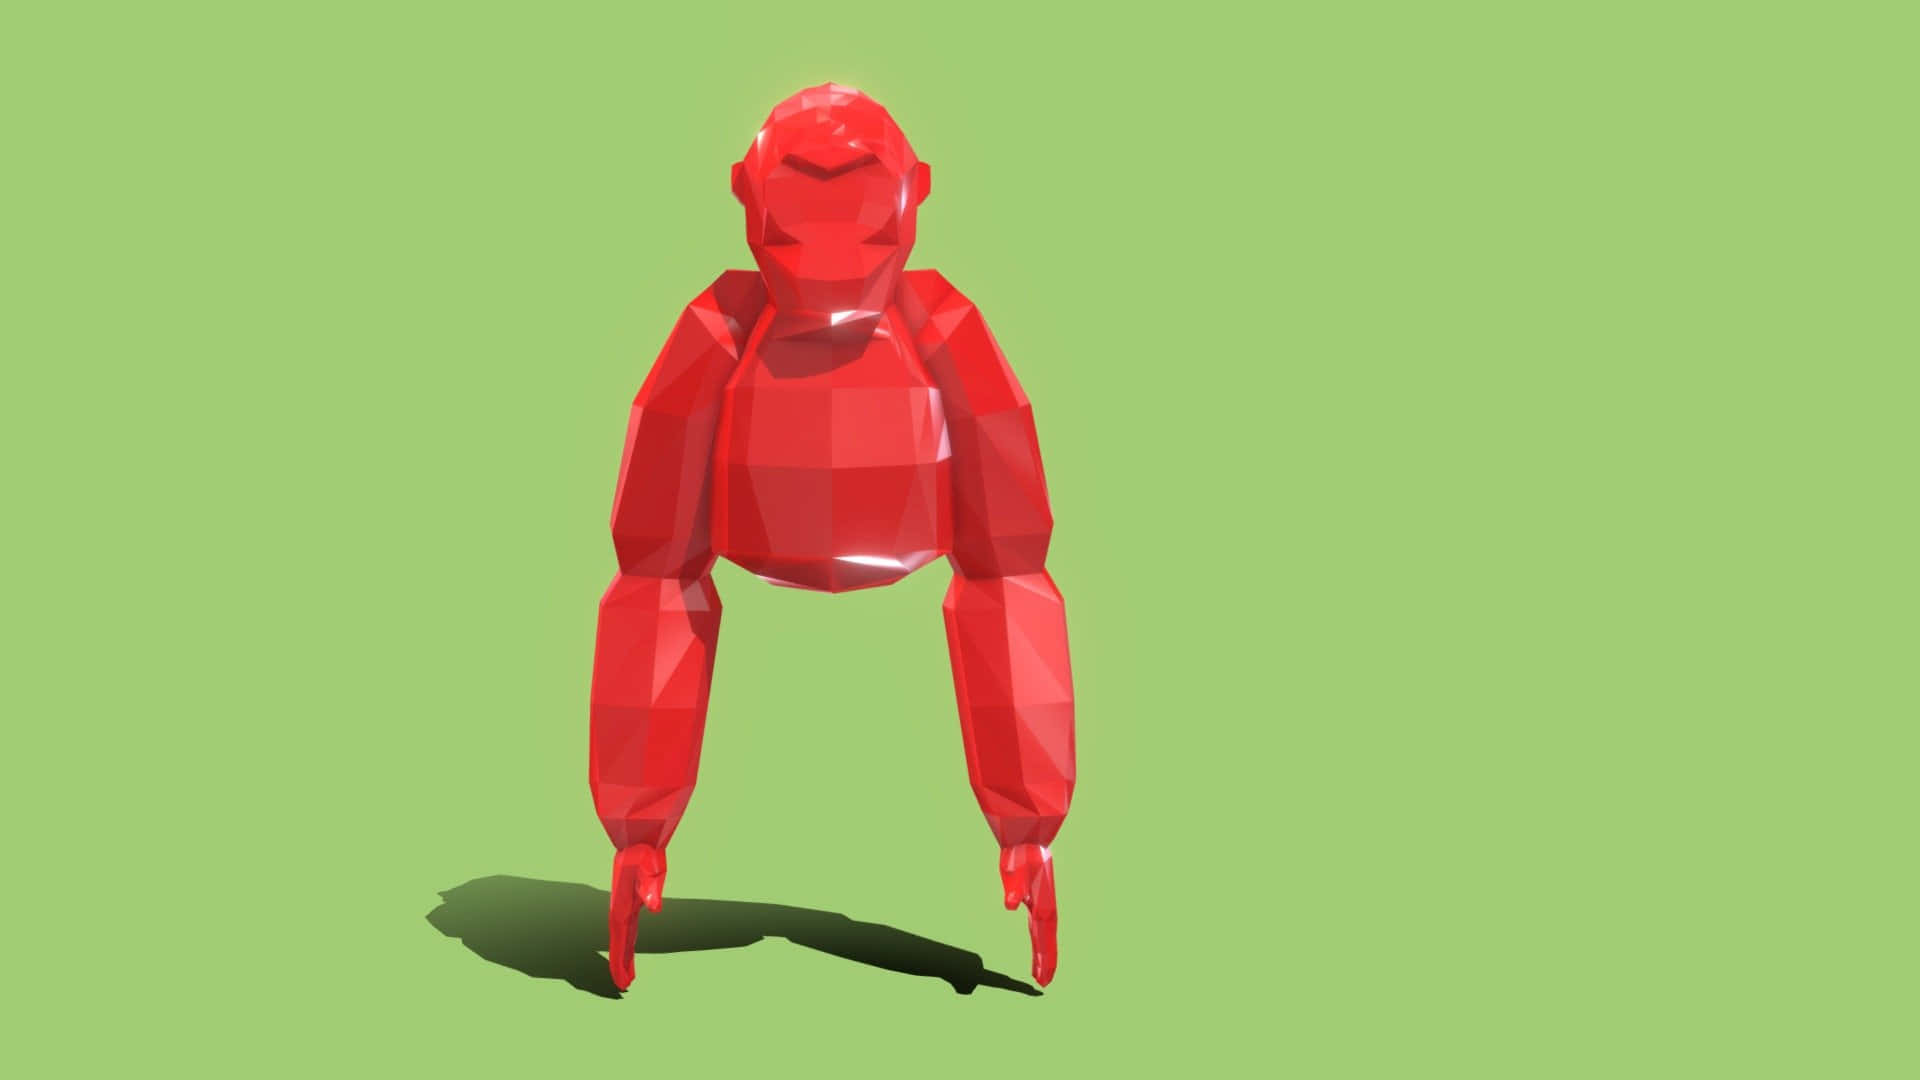 A Red Polygonal Robot Standing On A Green Background Wallpaper